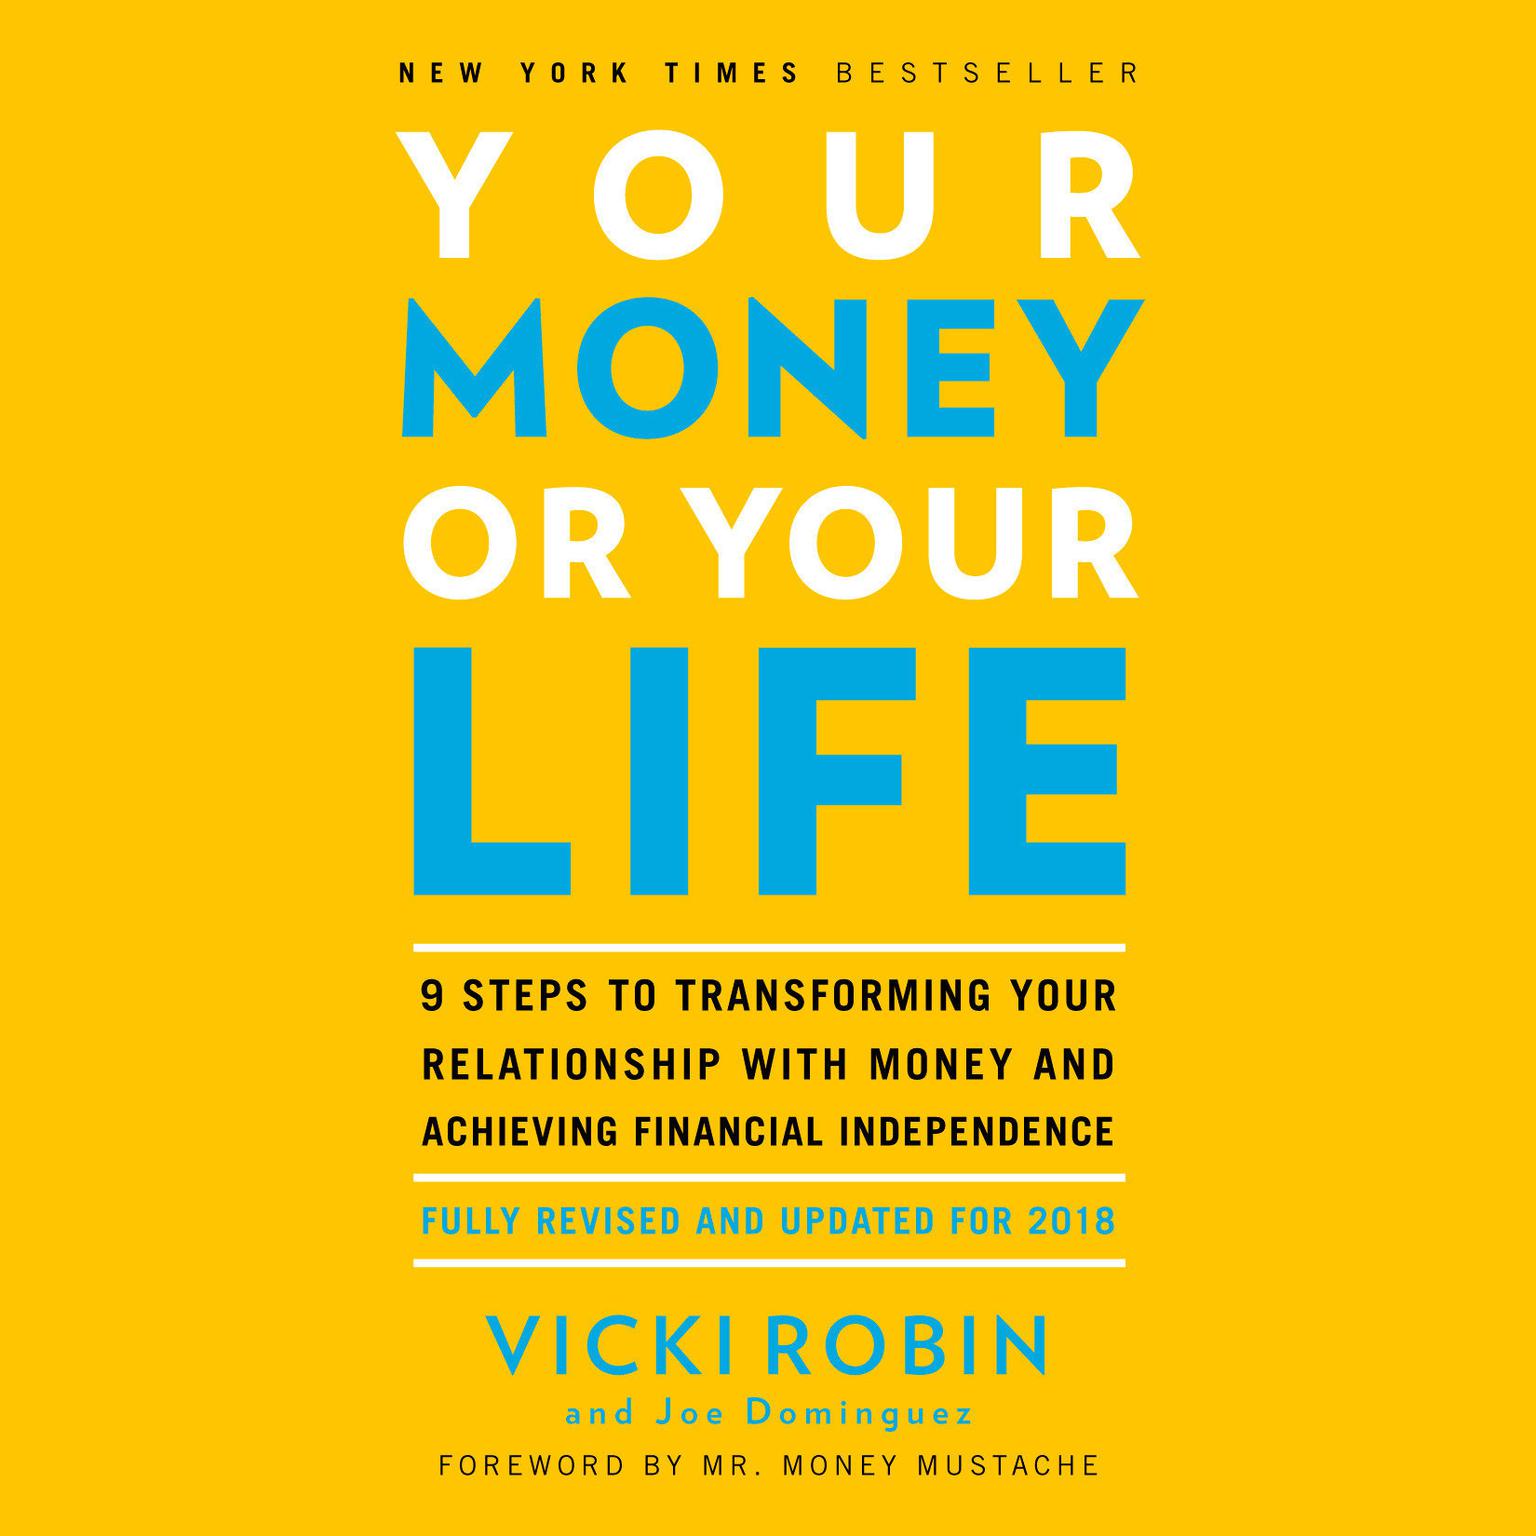 Your Money or Your Life: 9 Steps to Transforming Your Relationship with Money and Achieving Financial Independence: Fully Revised and Updated for 2018 Audiobook, by Vicki Robin